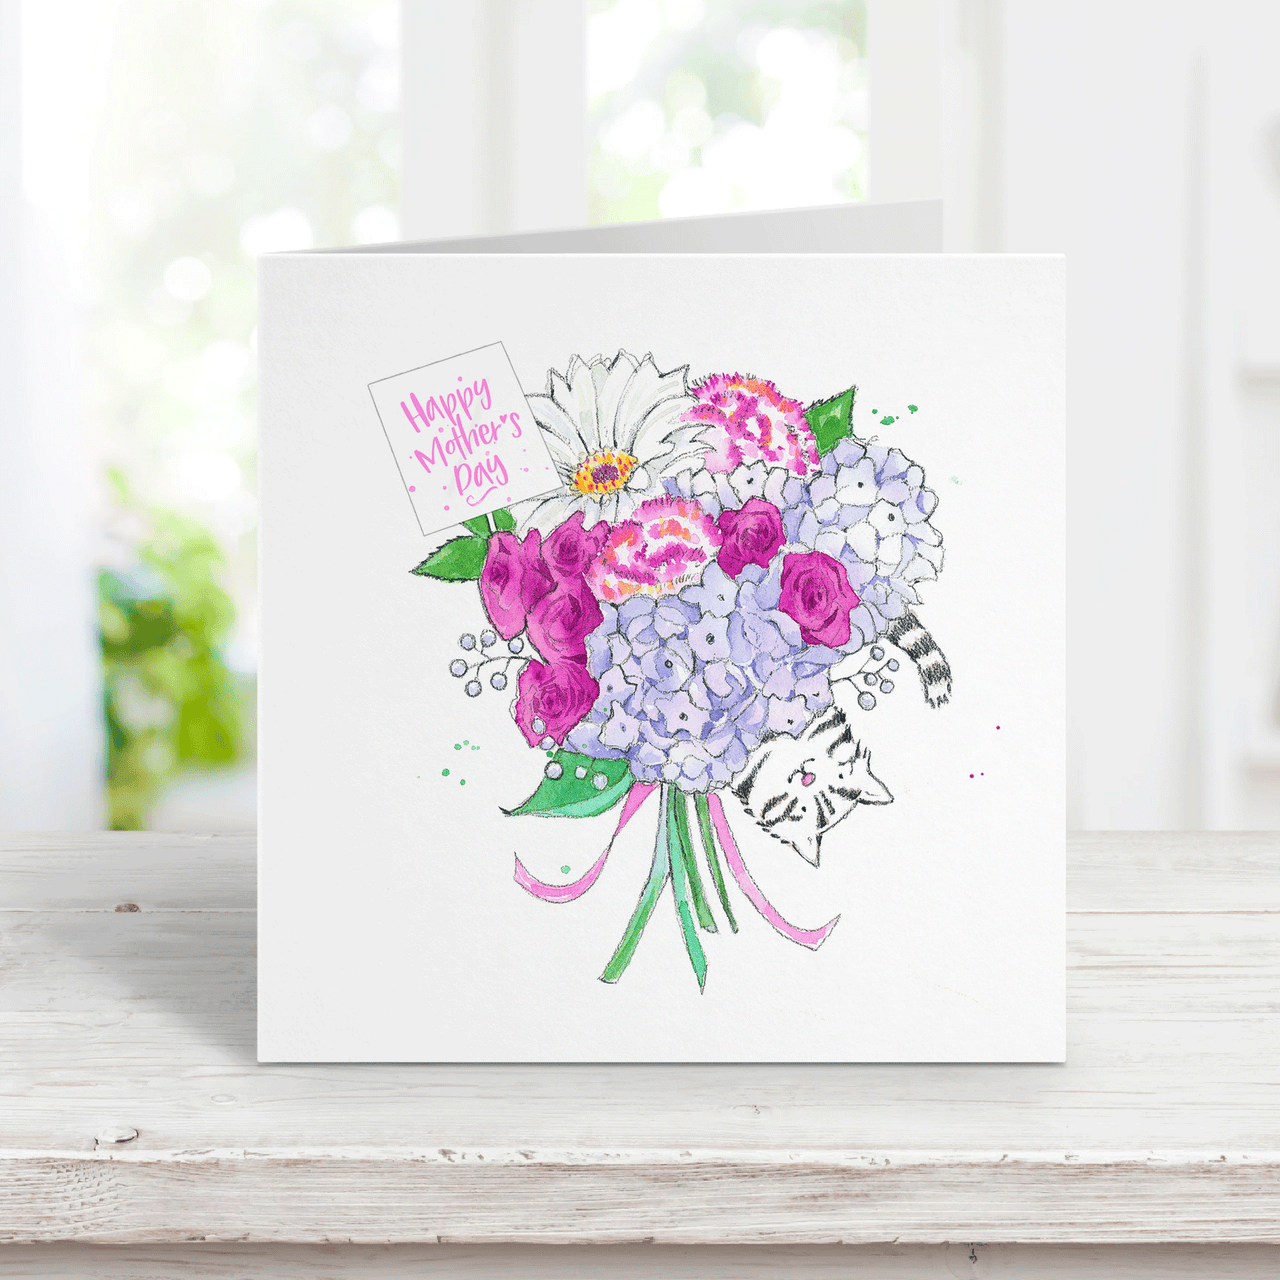 A watercolor card with a gray tabby cat peeking out behind a bouquet of purple flowers with a small tag that says Happy Mothers Day